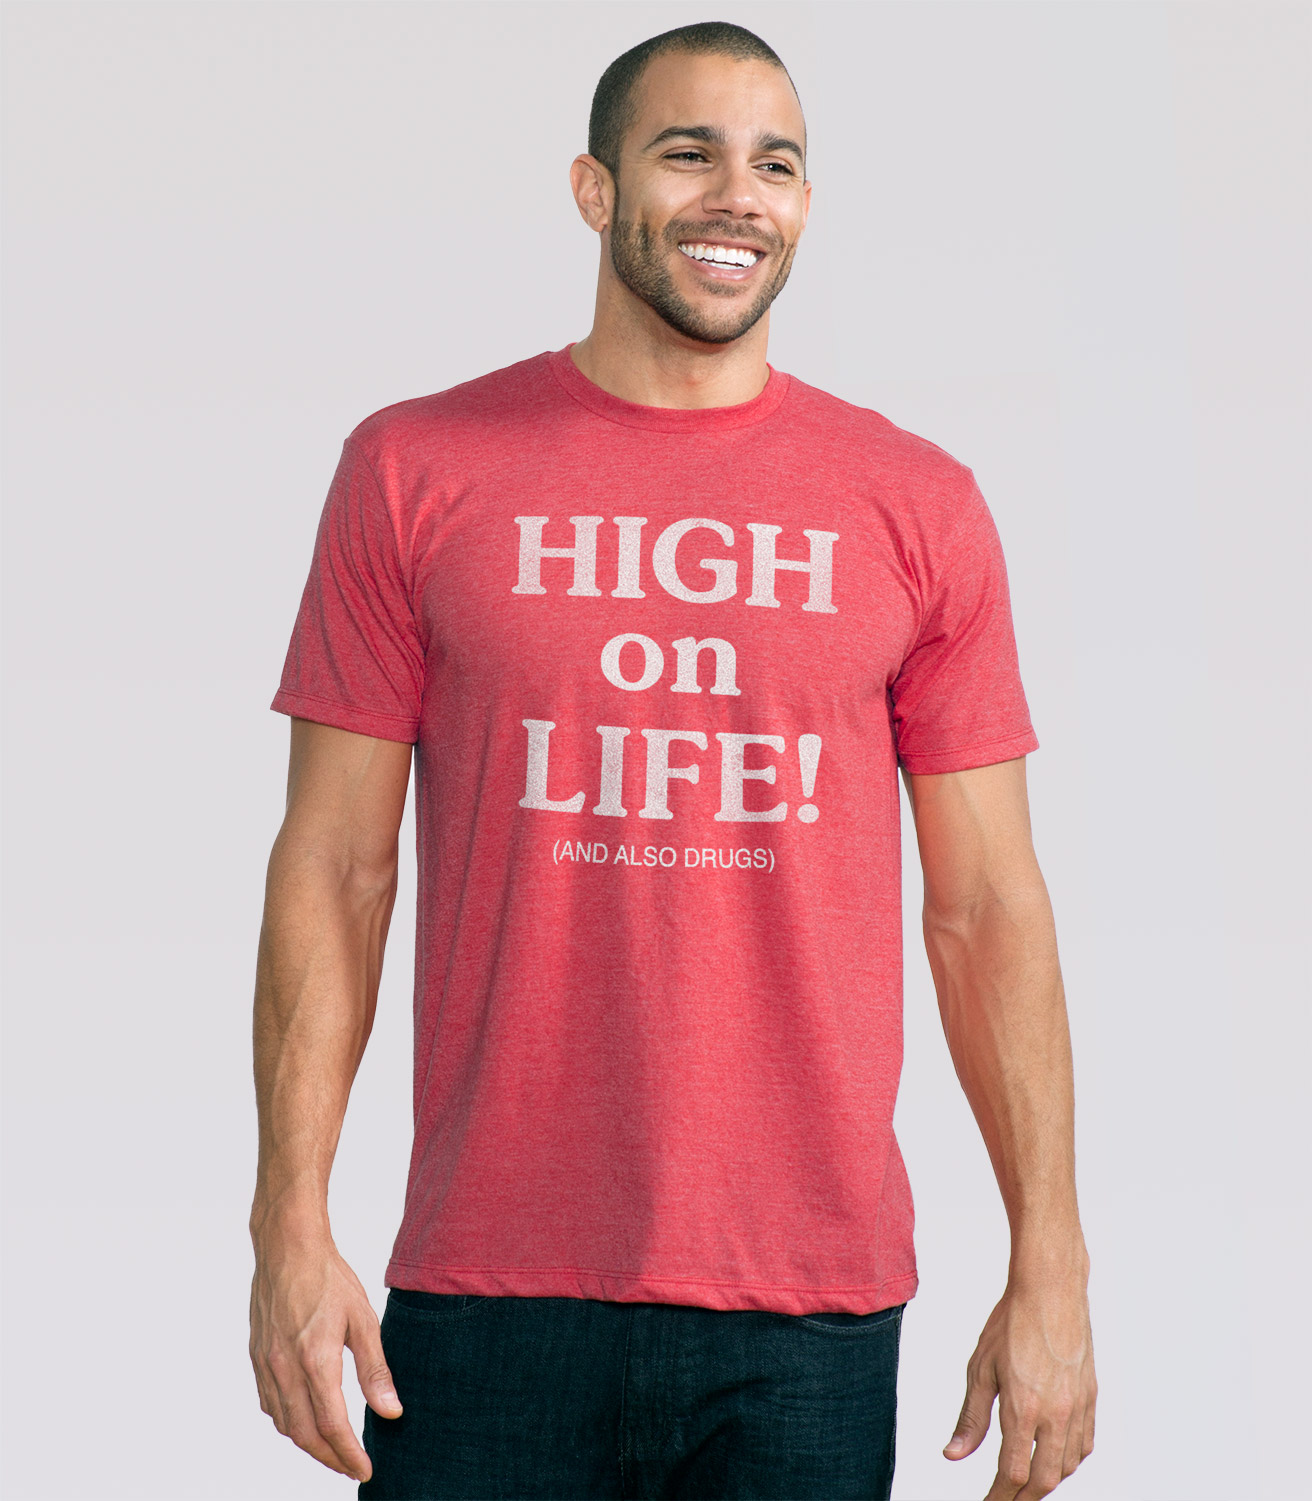 High on Life! (and Drugs) Men's Funny T-Shirt | Headline Shirts